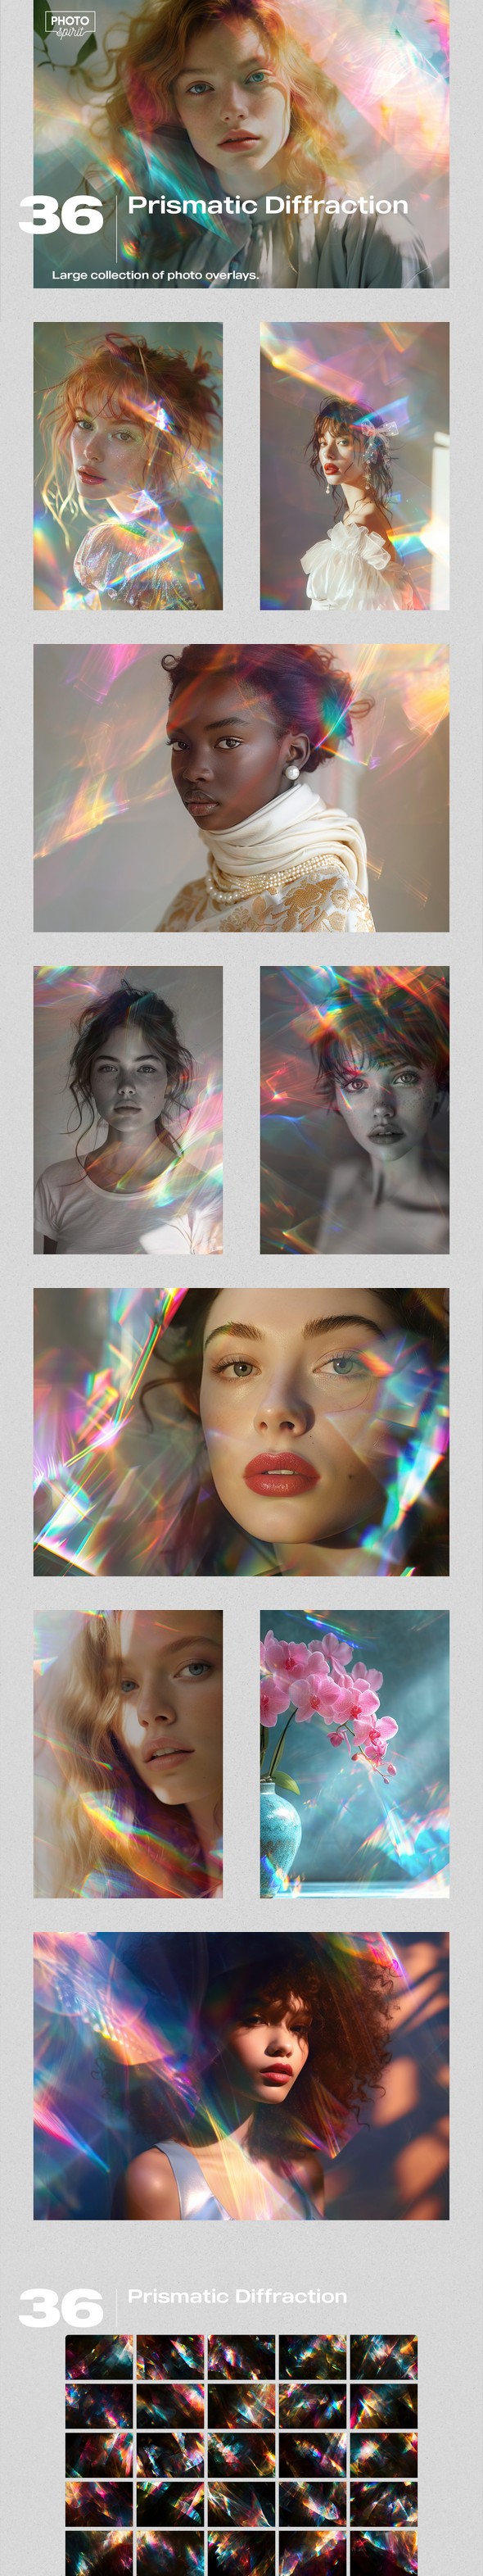 [DOWNLOAD]36 Prismatic Diffraction Effect Photo Overlays